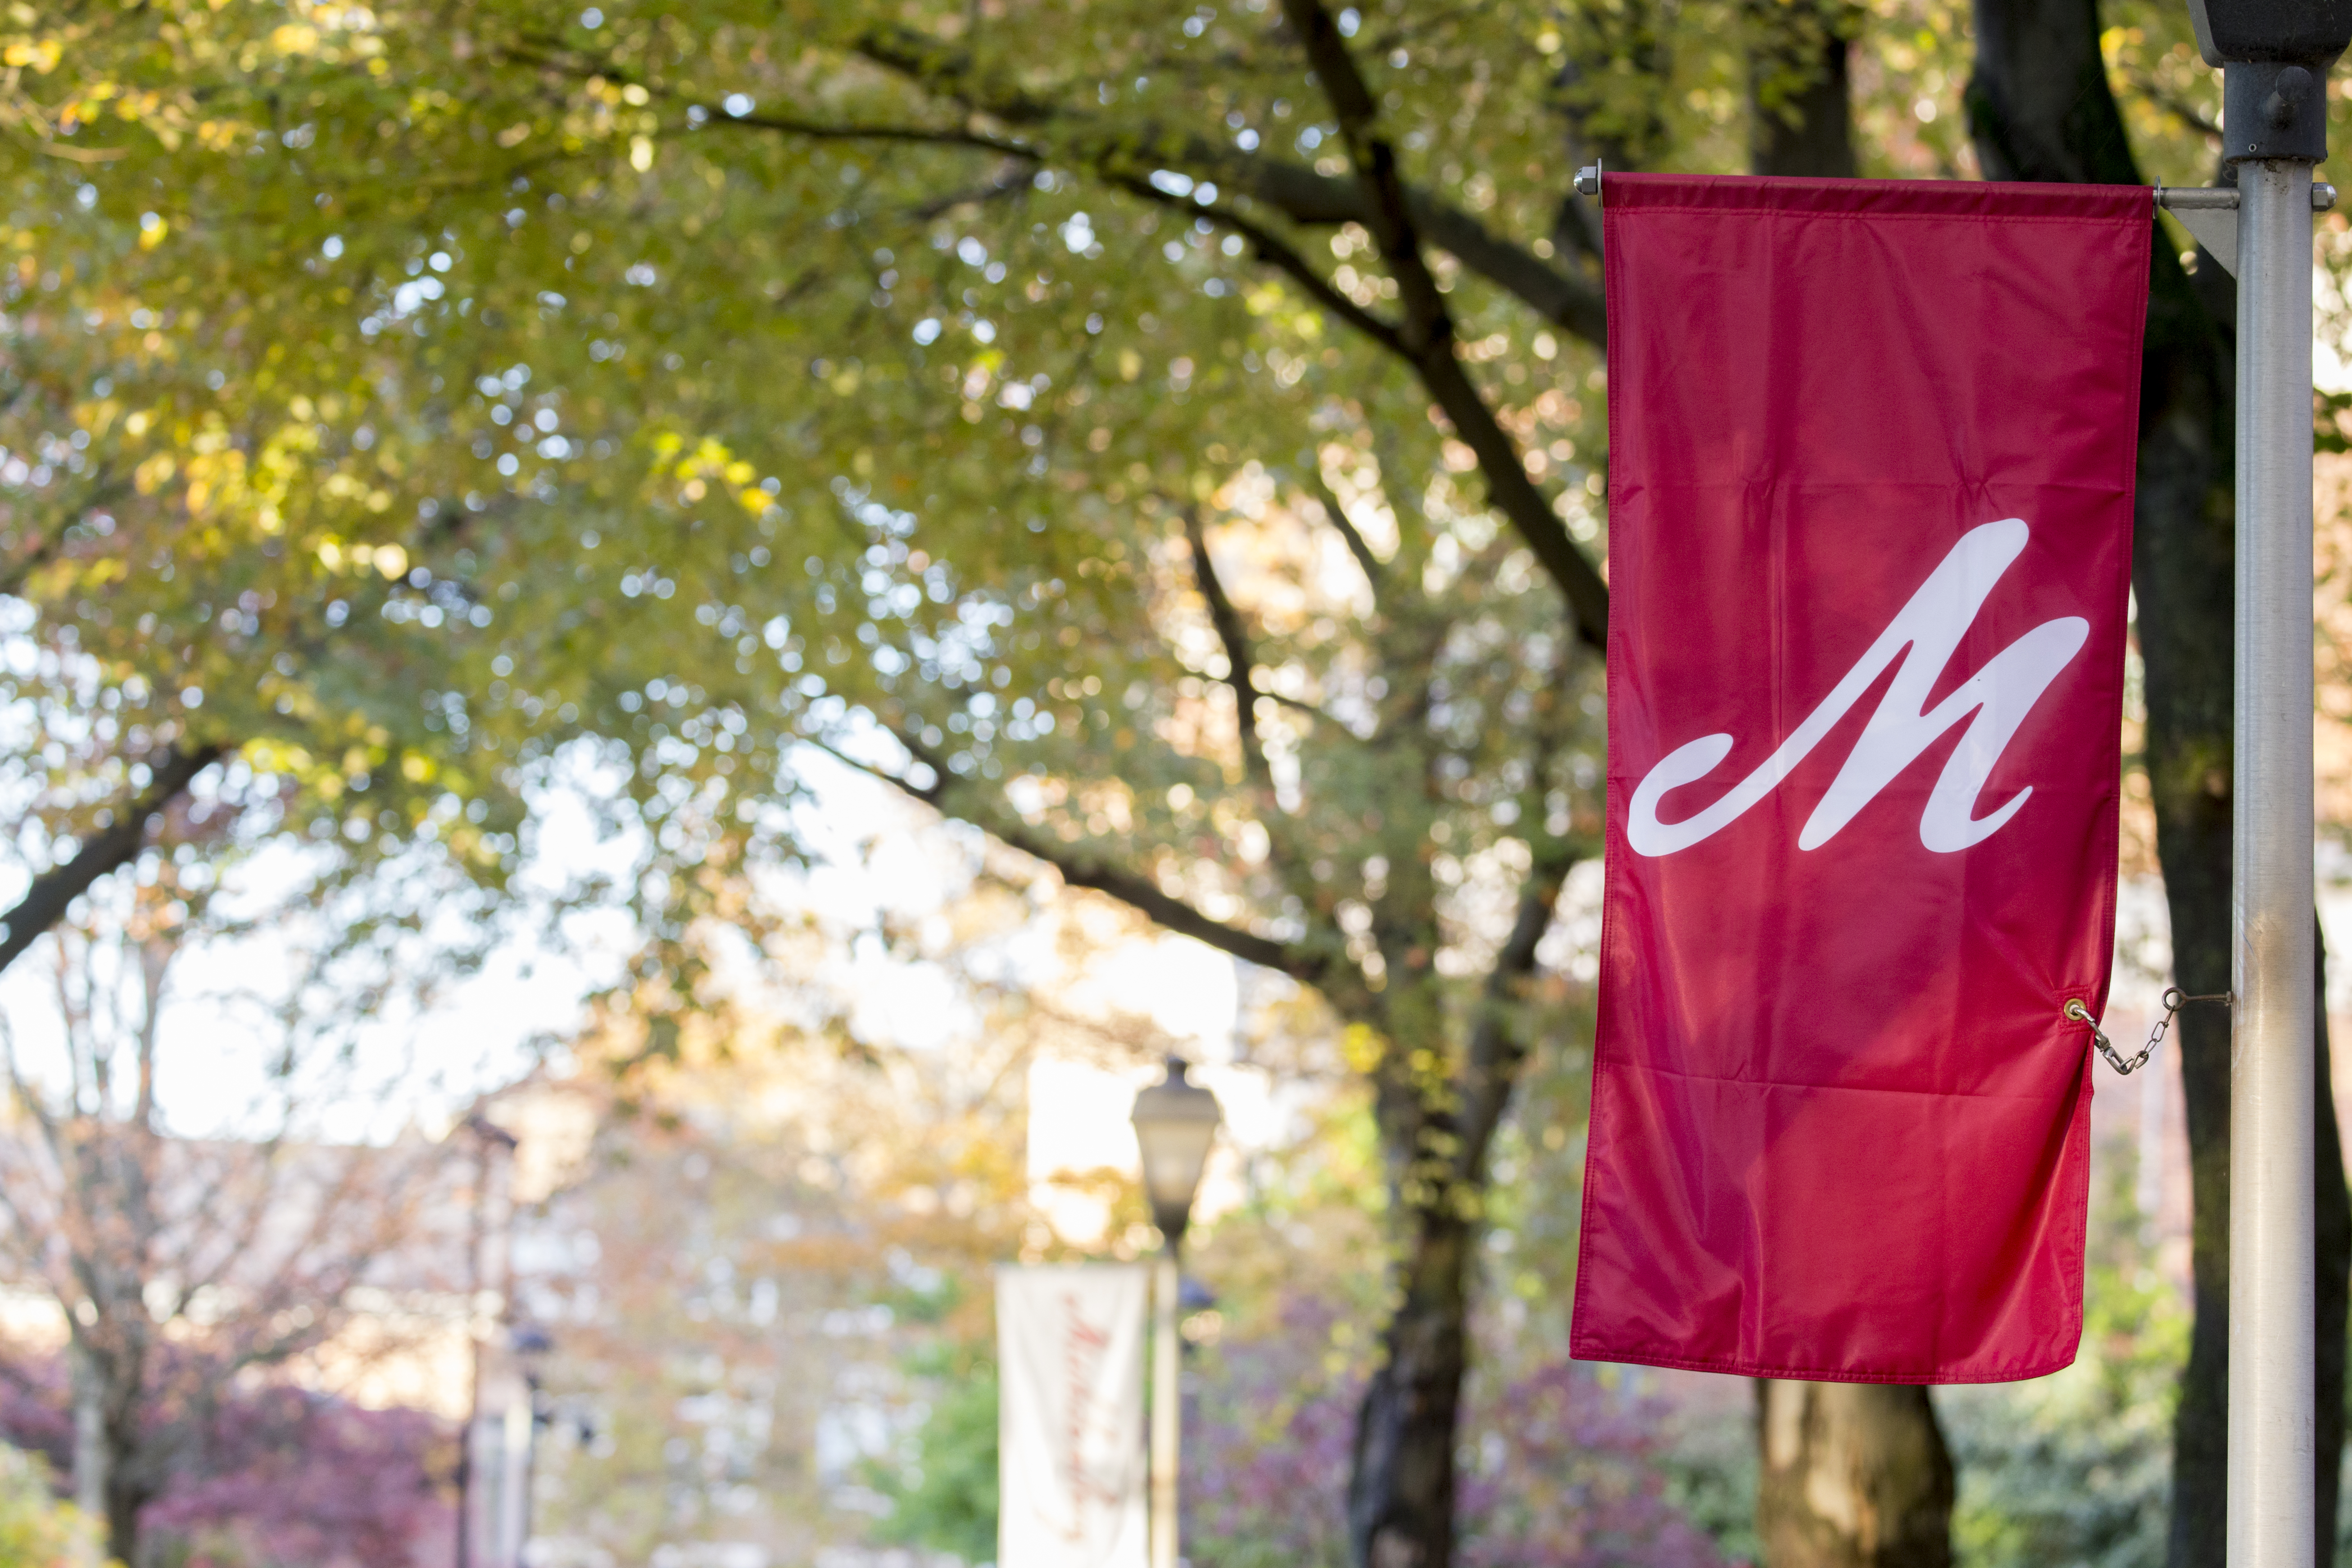 Image of a red flag with white script logo of Muhlenberg M, with trees in the background.